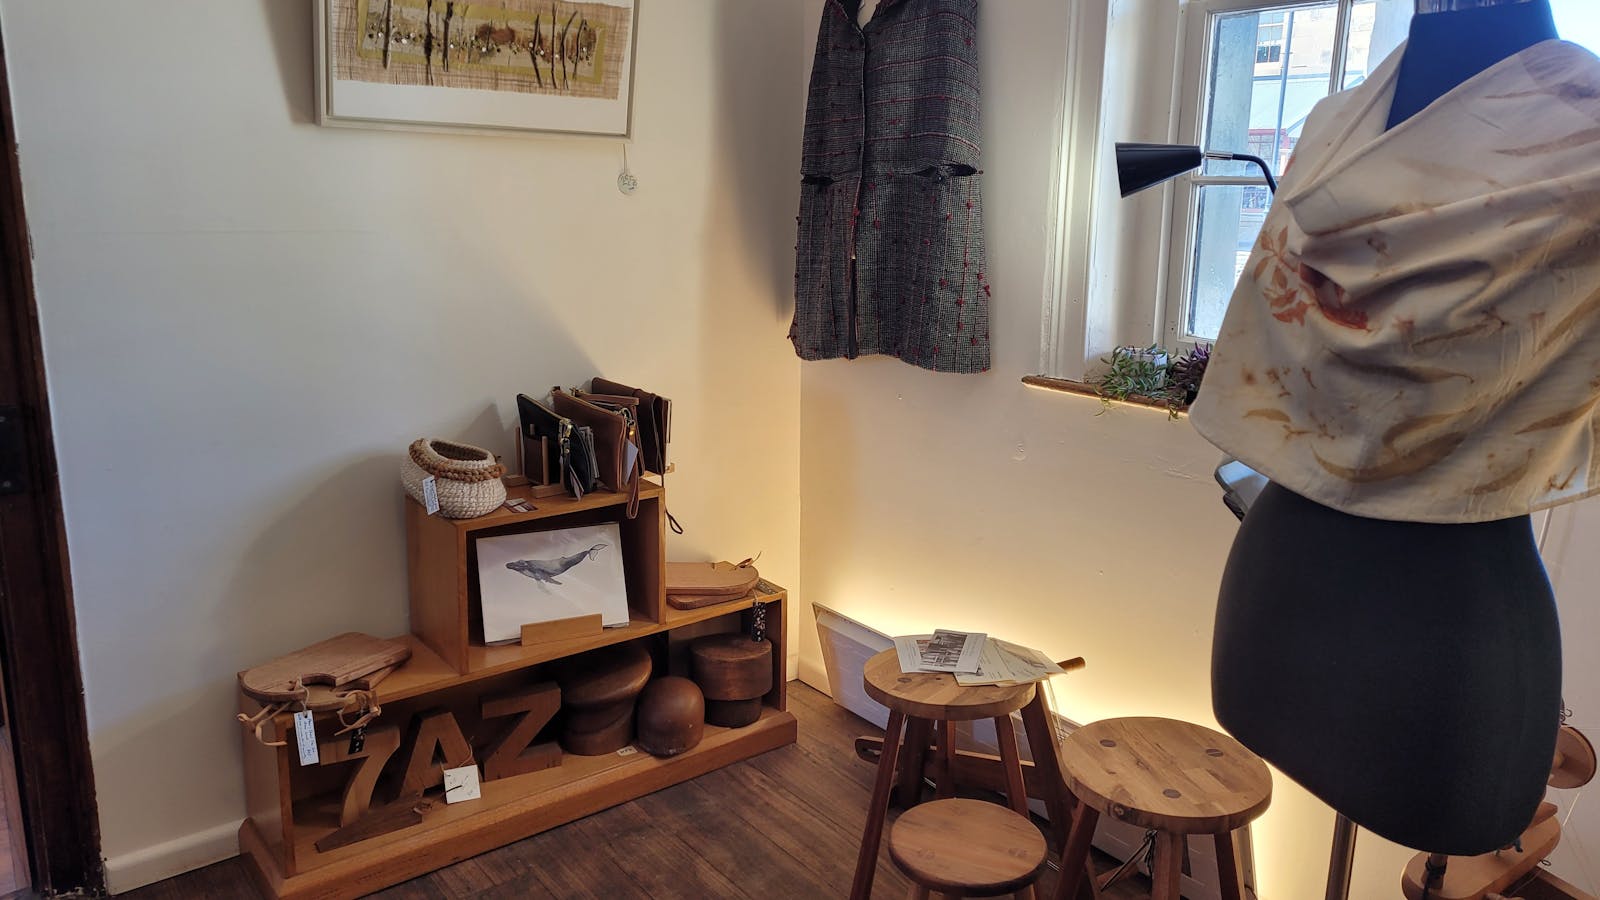 Work from over fifty Tasmanian makers includes furniture, clothing, artwork and accessories.